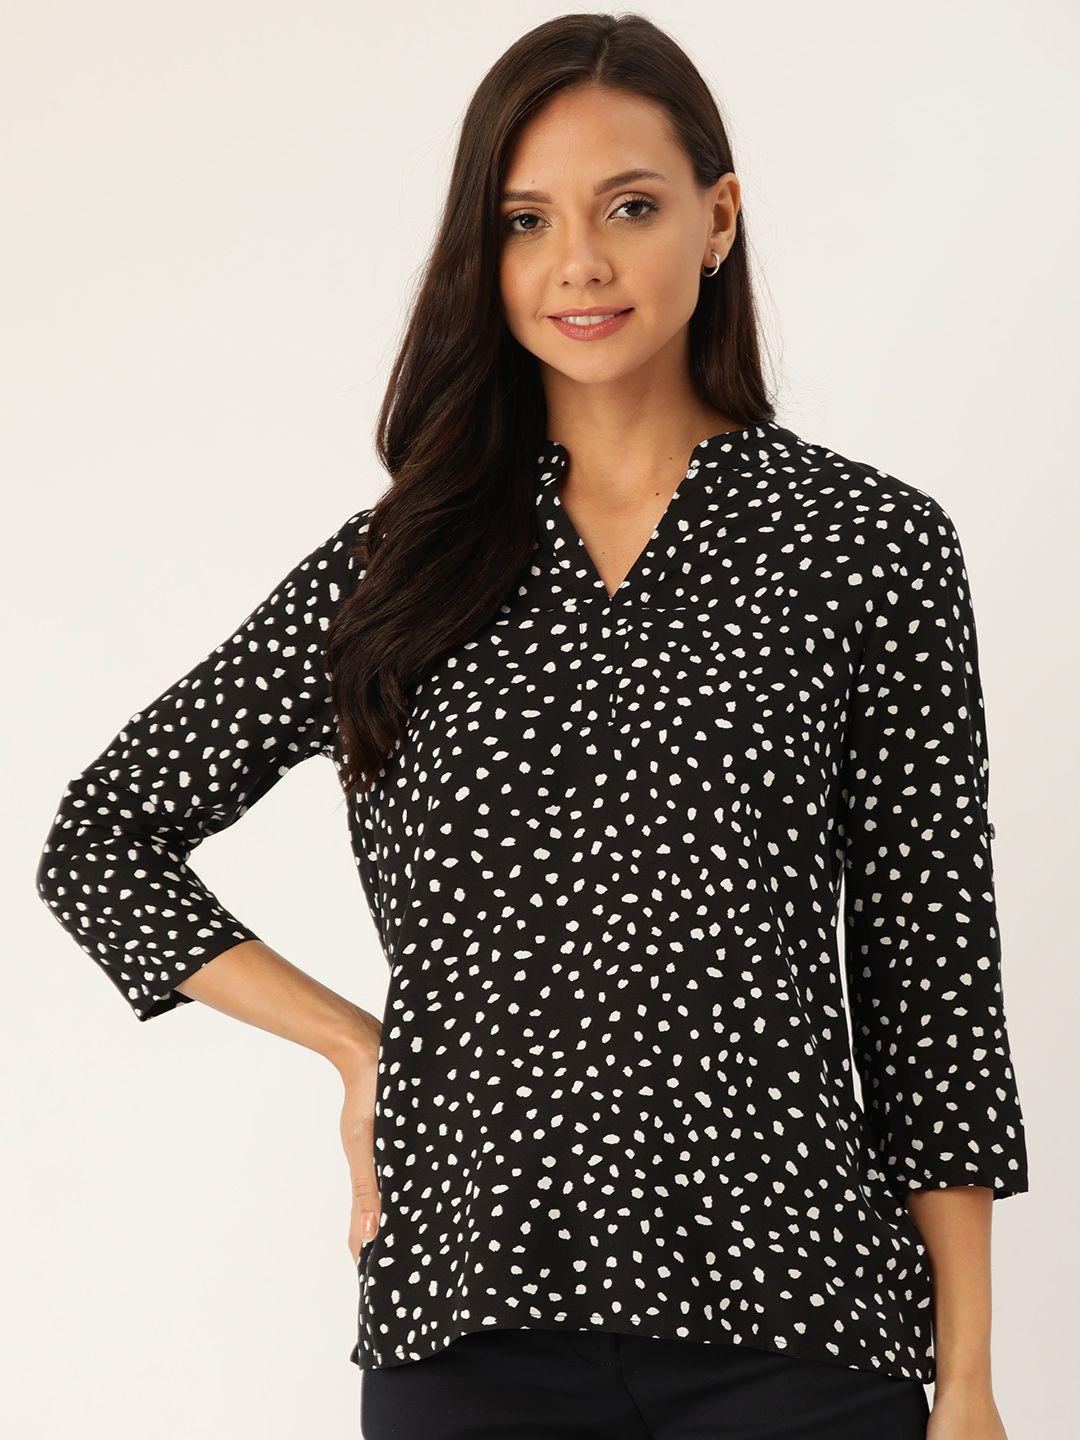 her by invictus women black & white printed shirt style top